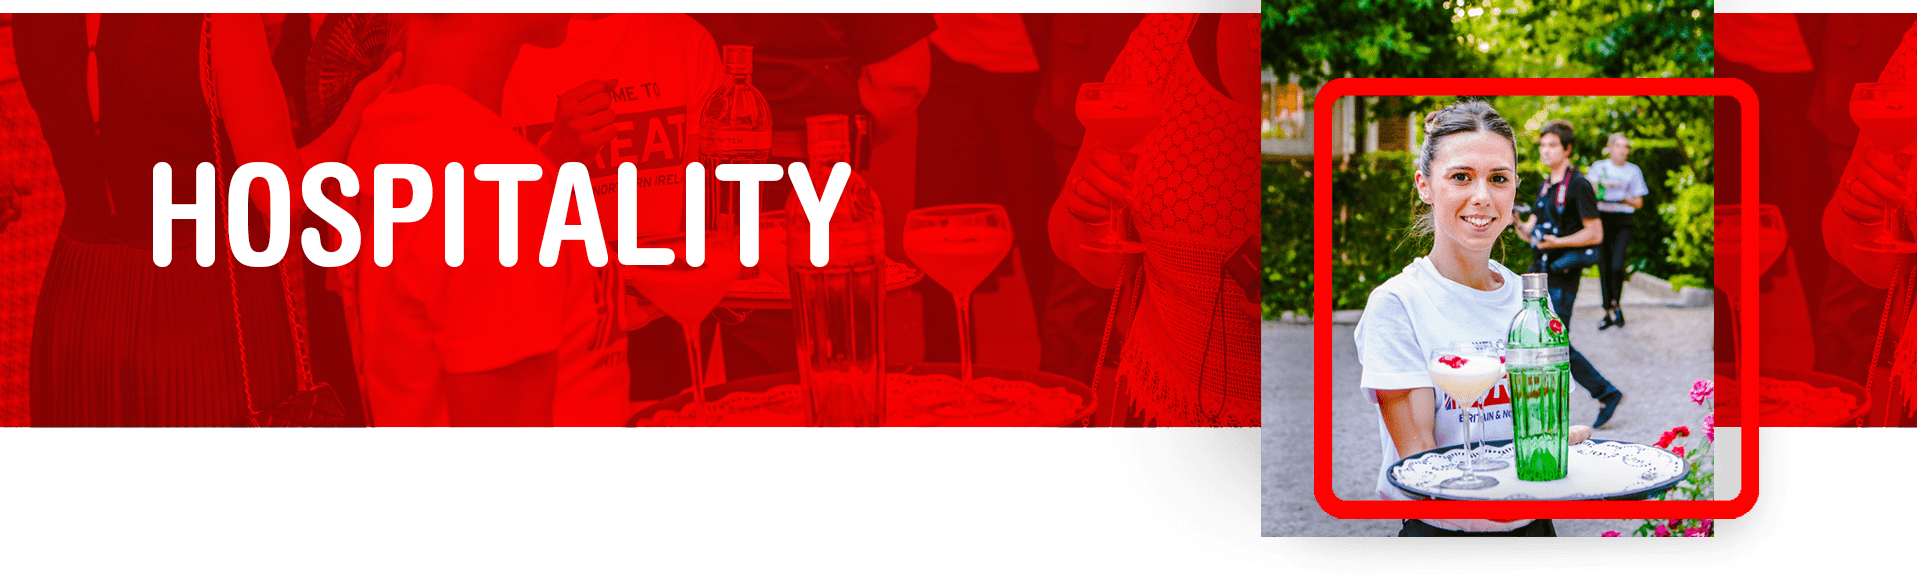 Hospitality services in events